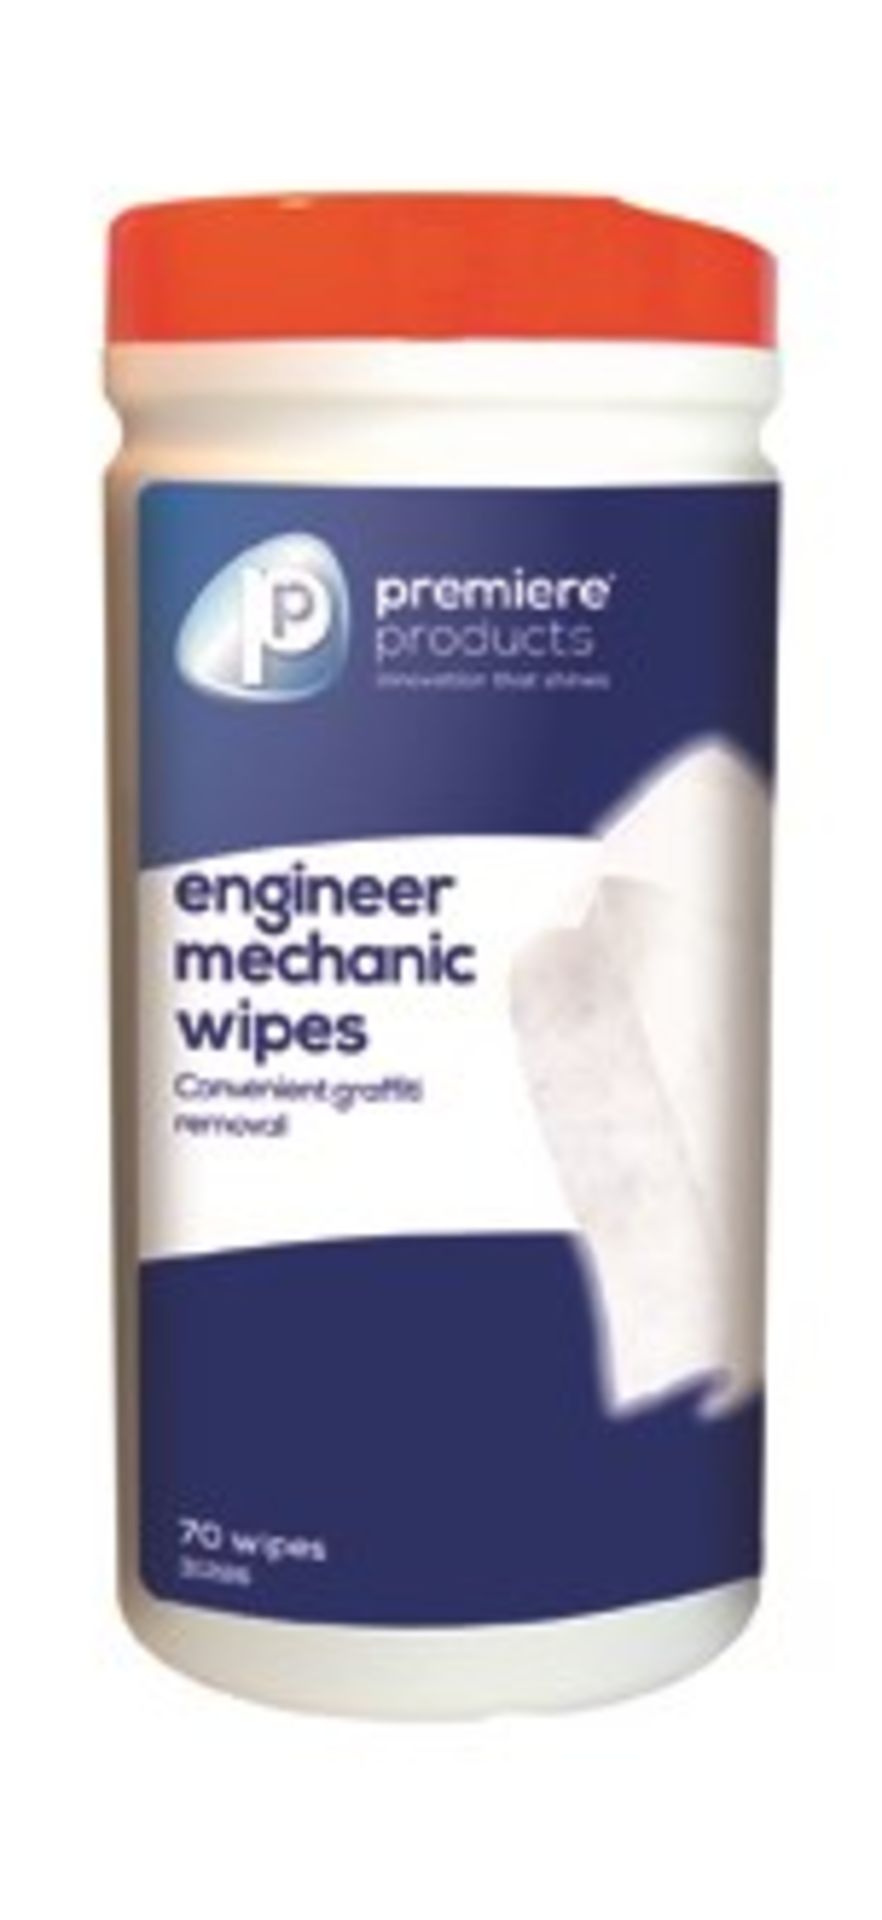 1 x Premiere Engineer and Mechanic Wipes - Heavy Duty Hand Cleaning Wet Wipes - Premiere